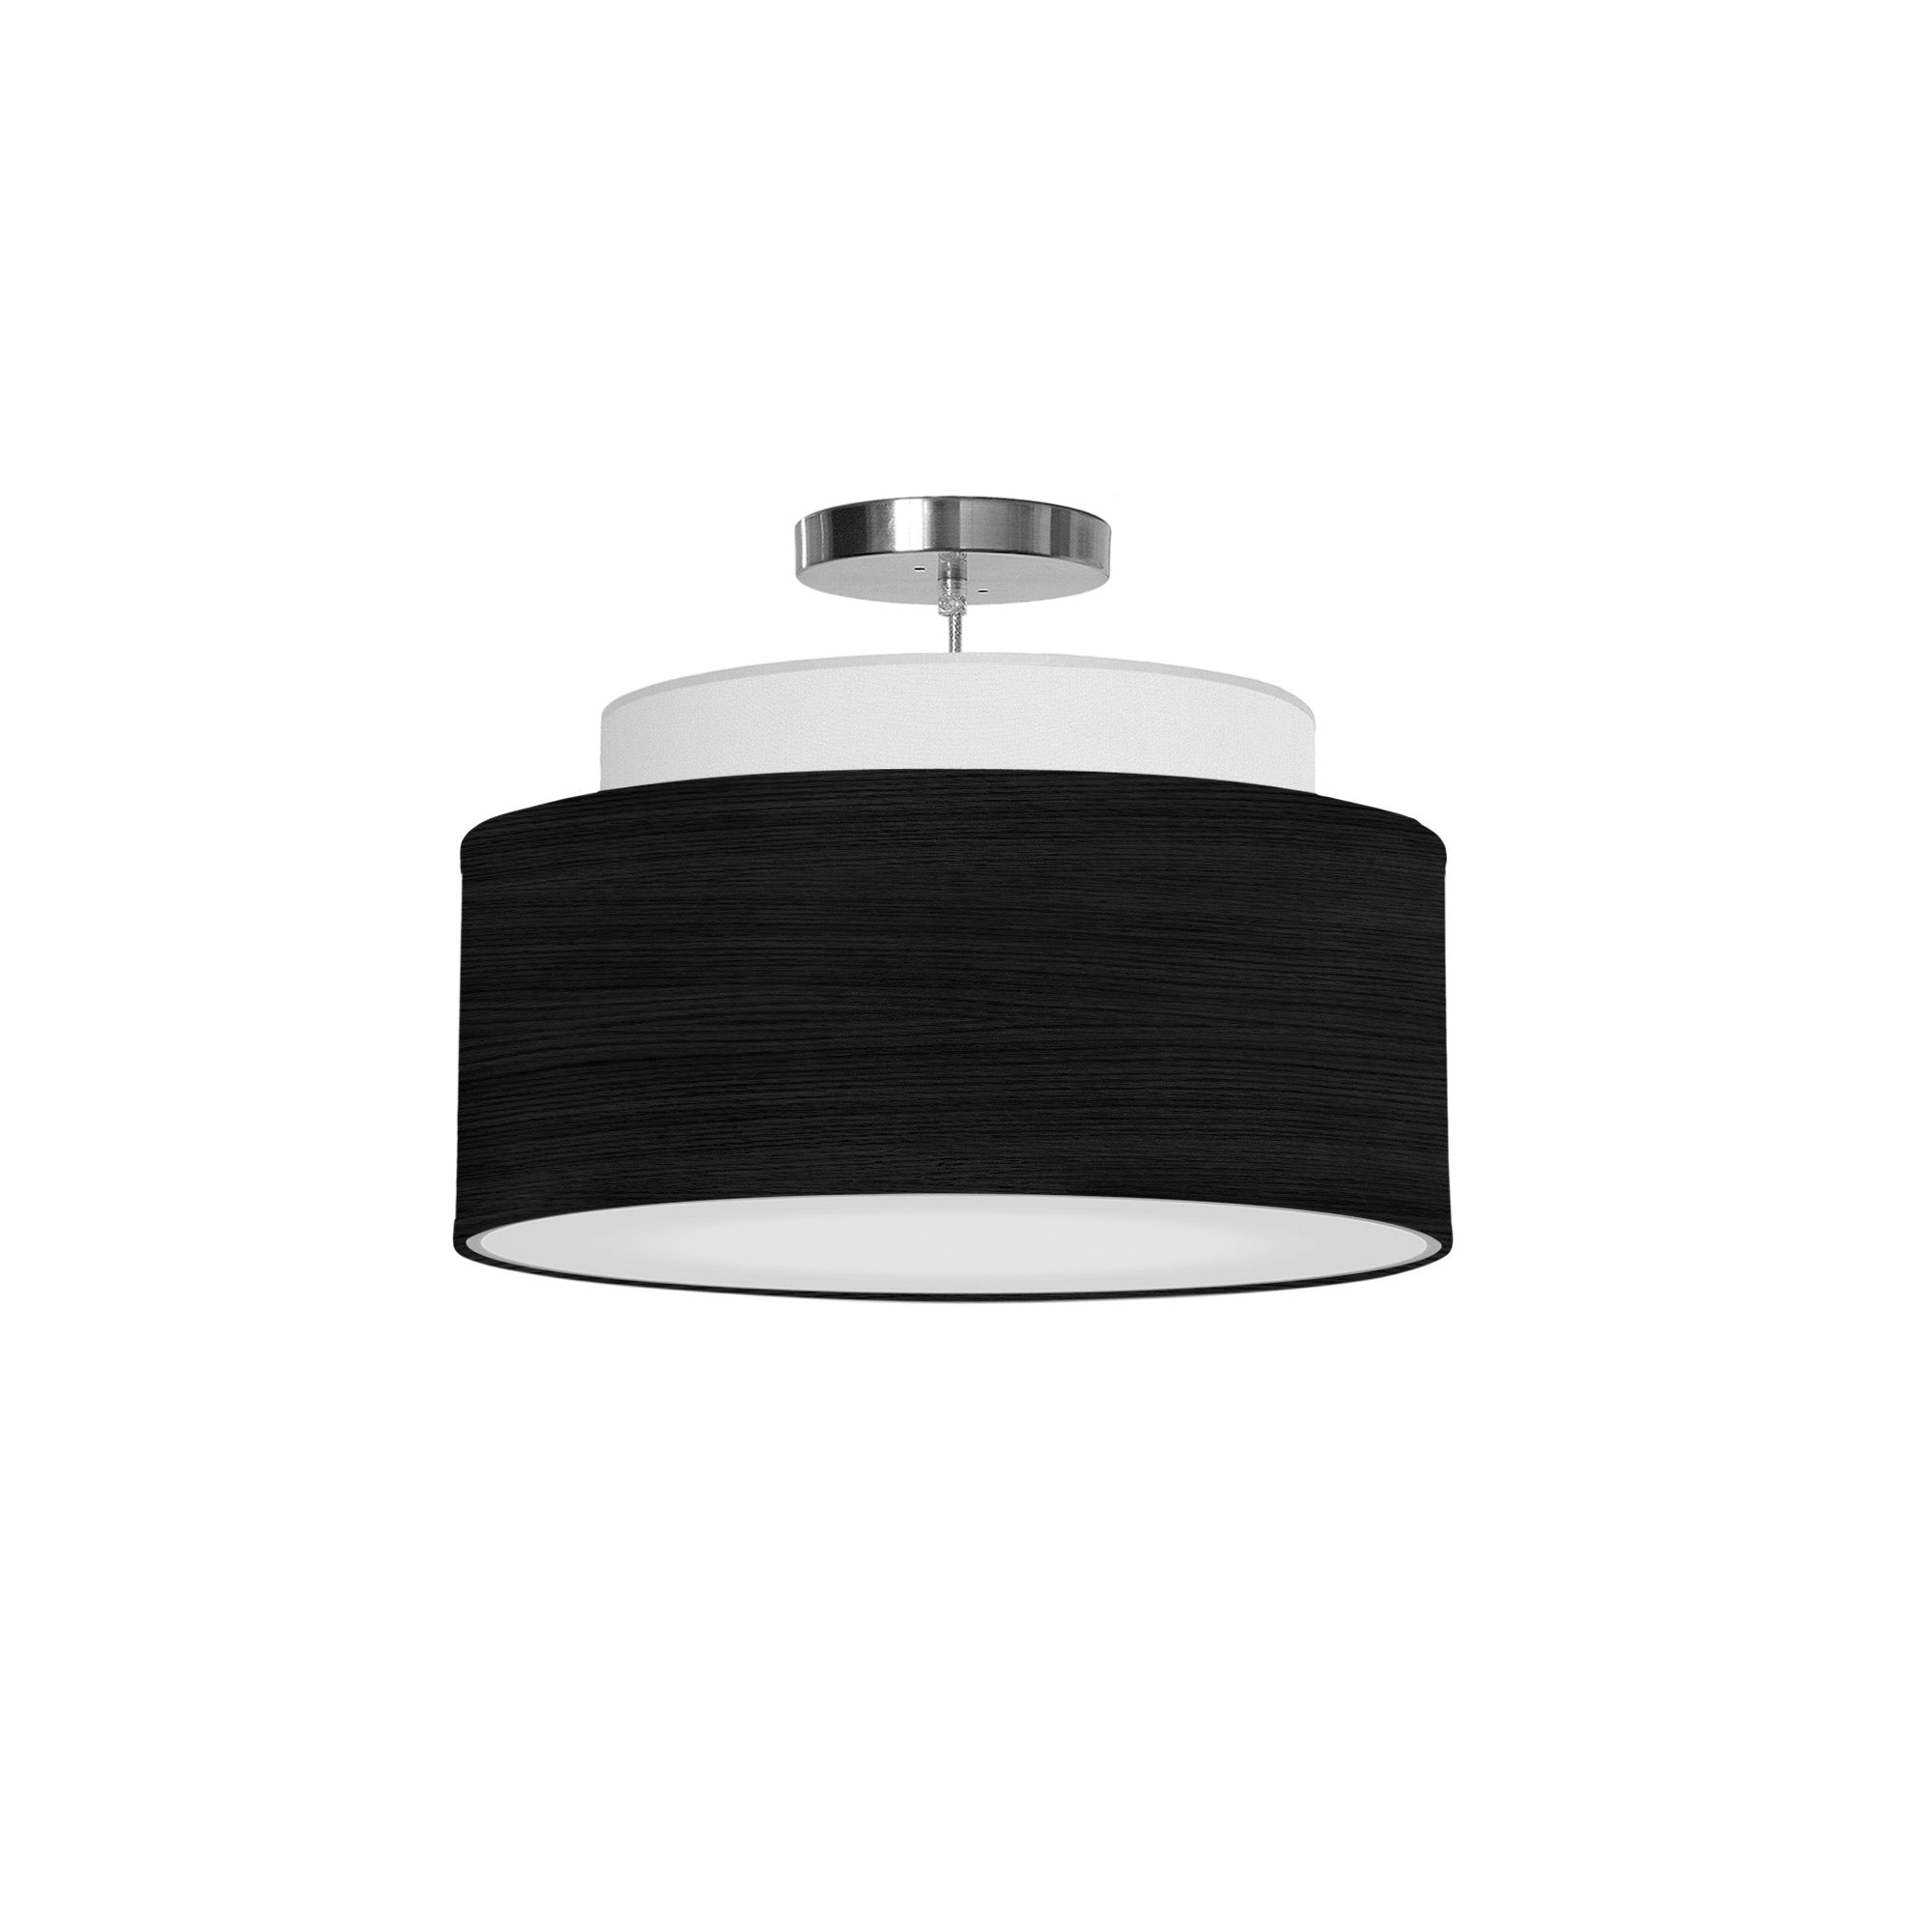 The Elsa Hanging Lamp from Seascape Fixtures with a photo veneer shade in ebony color.